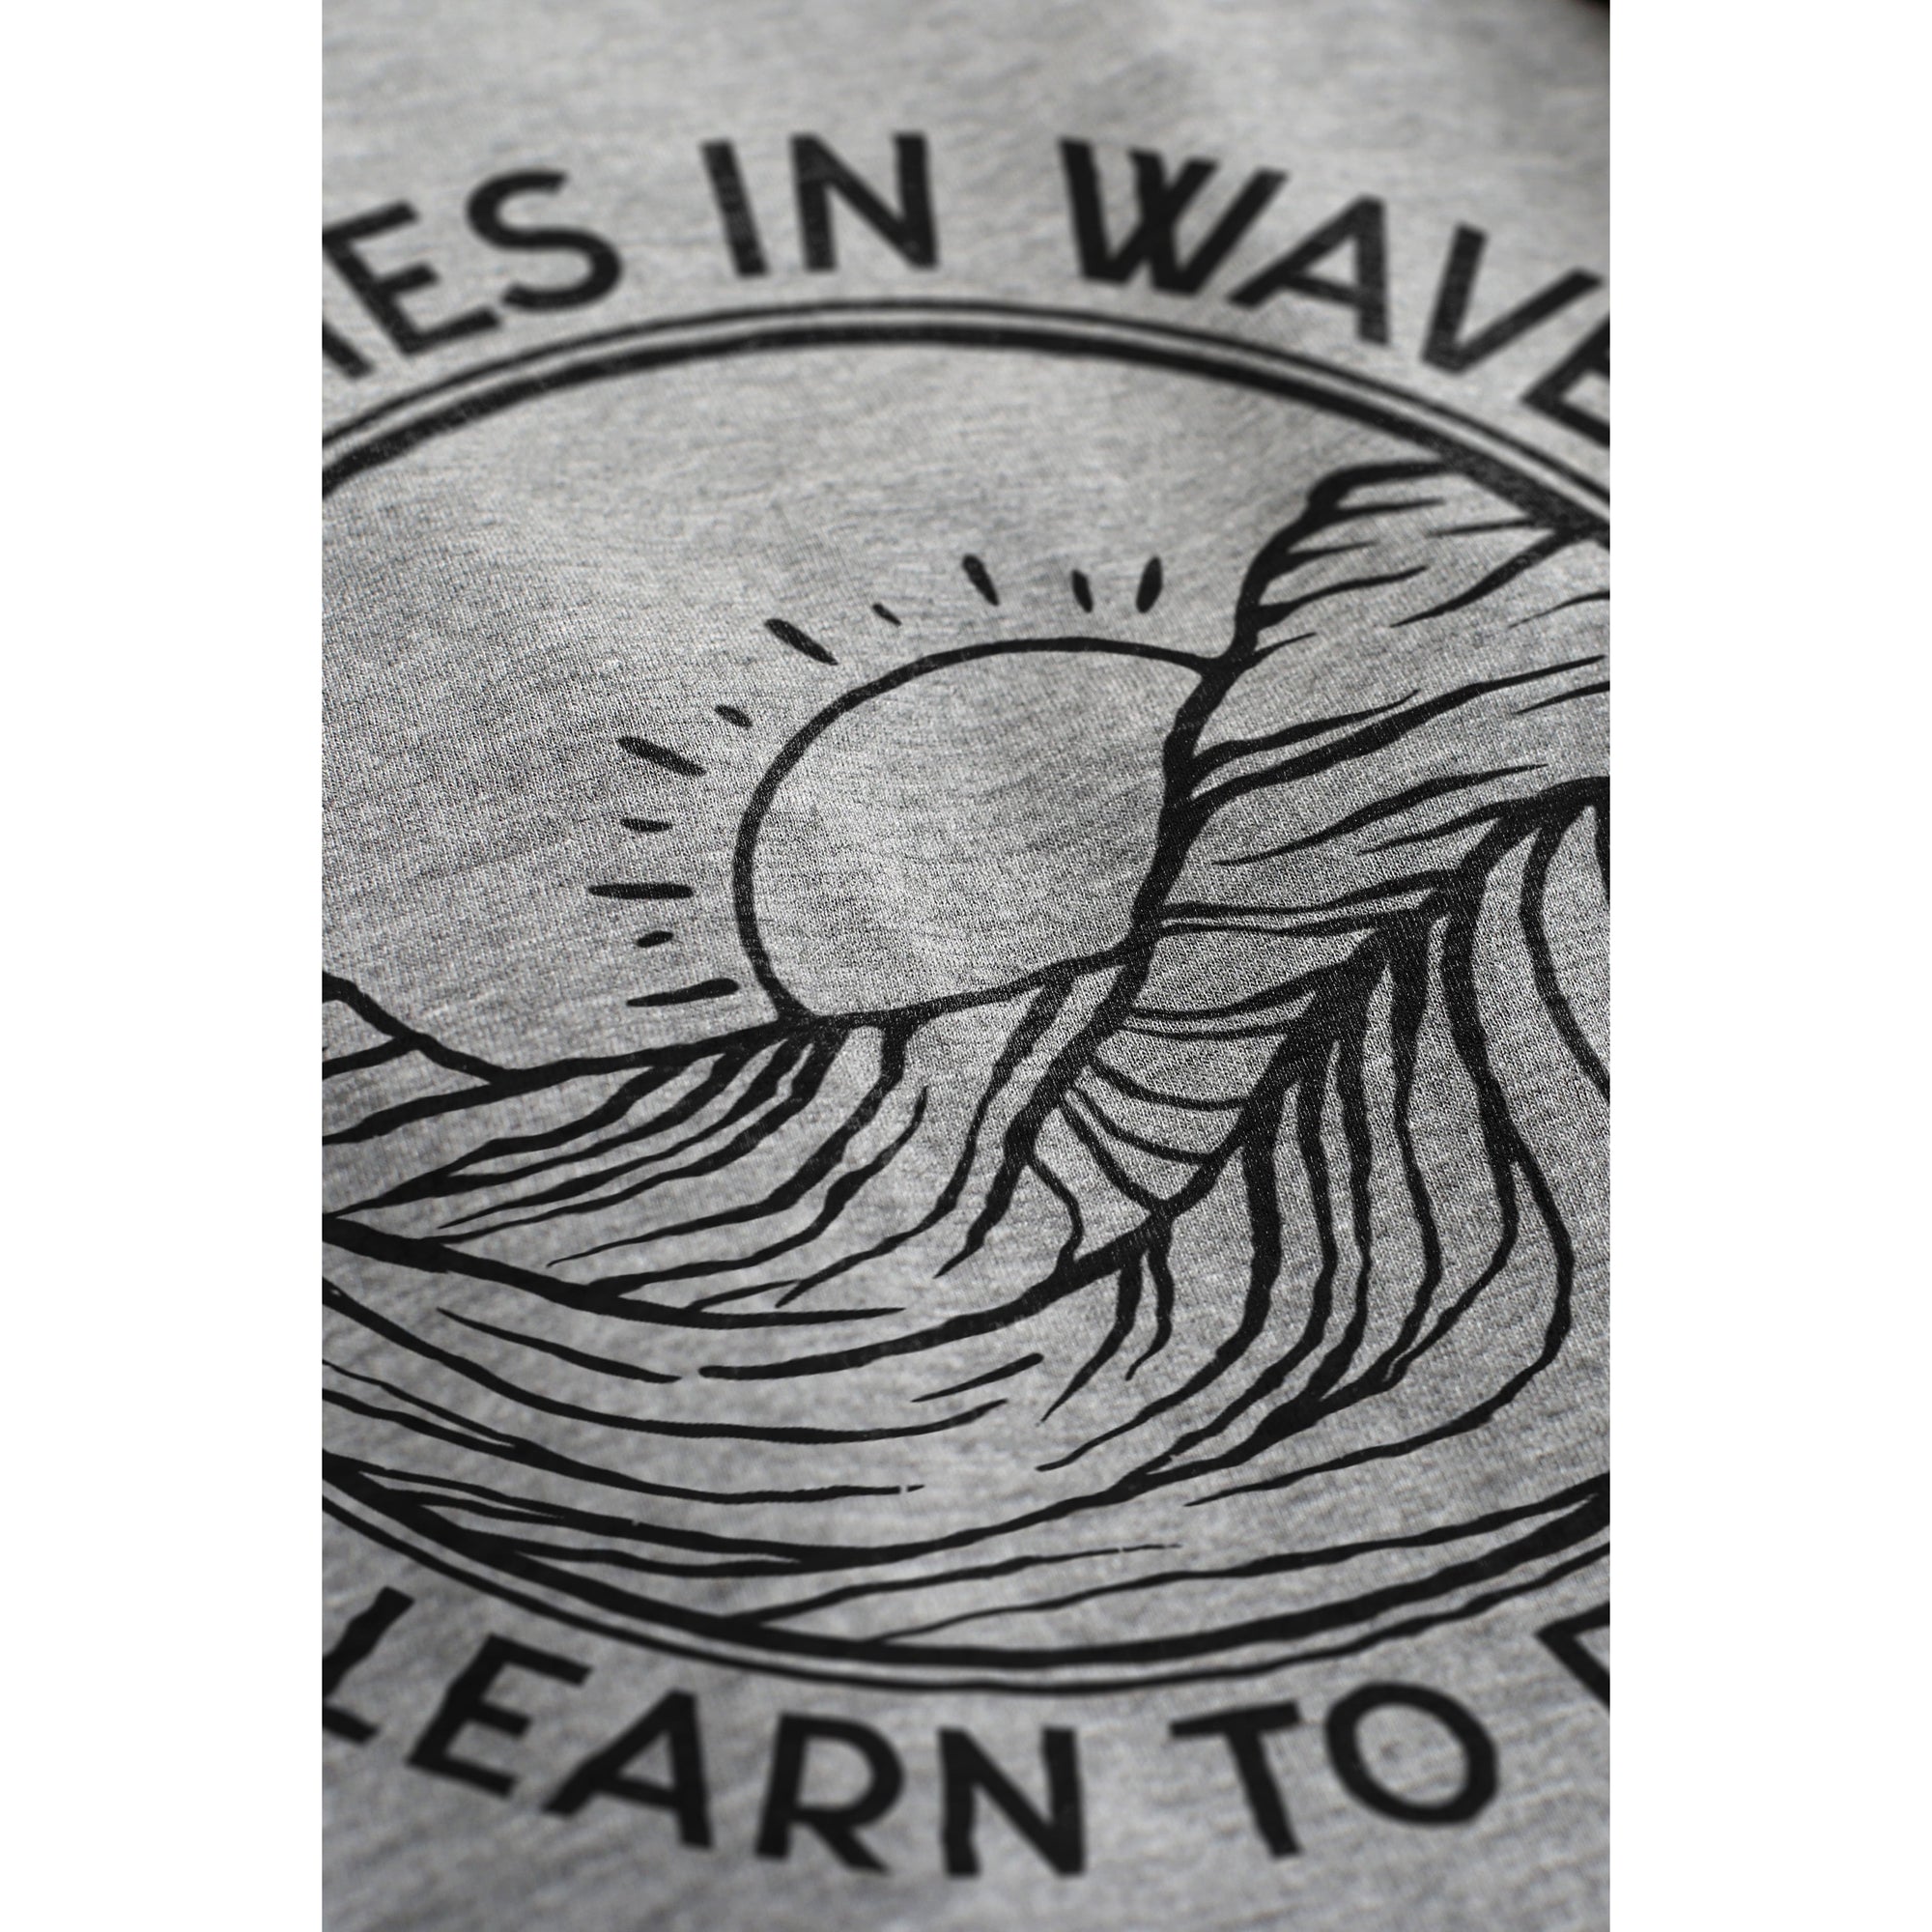 Life Comes In Waves - Learn To Ride It - thread tank | Stories you can wear.